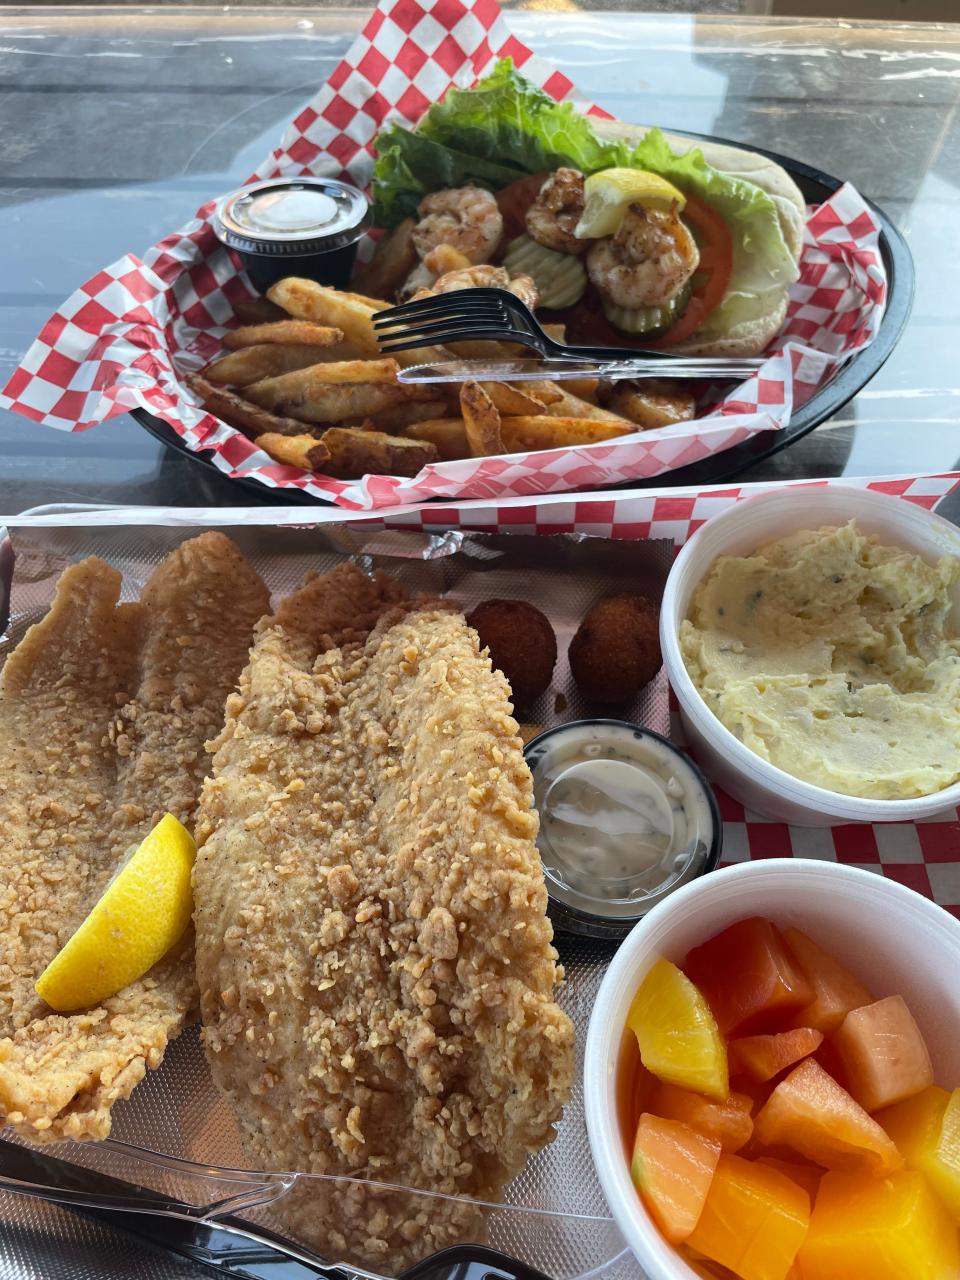 Fried catfish — two breaded filets served with my choice of two side dishes. I opted for potato salad and a fruit cup. Top: shrimp po’ boy — seasoned Gulf grilled shrimp prepared served on a bun with lettuce, tomatoes and pickles and fries. July 2022